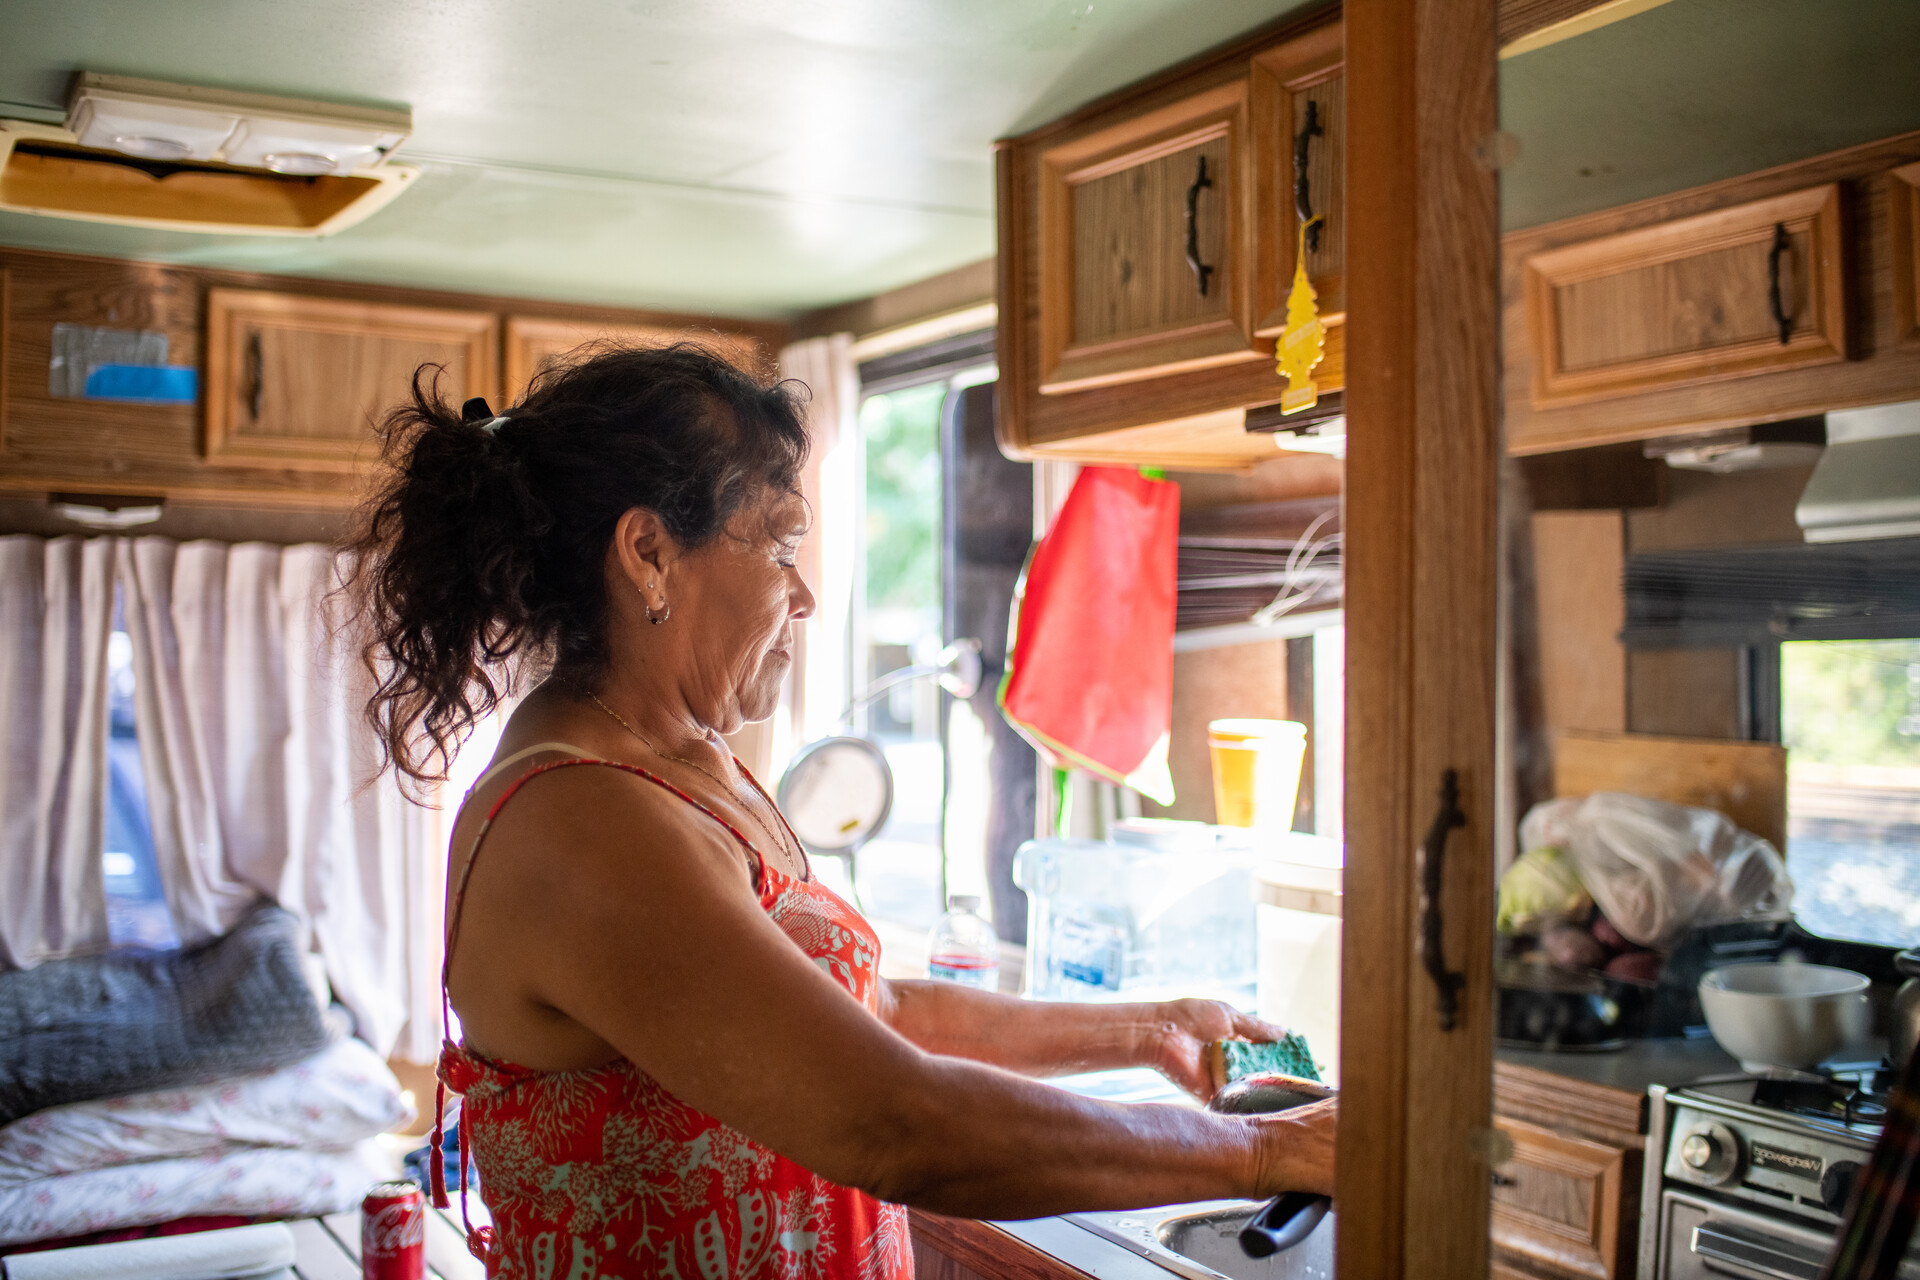 woman wearing red dress washes dishes at a sink inside an RV as light streams in through the window